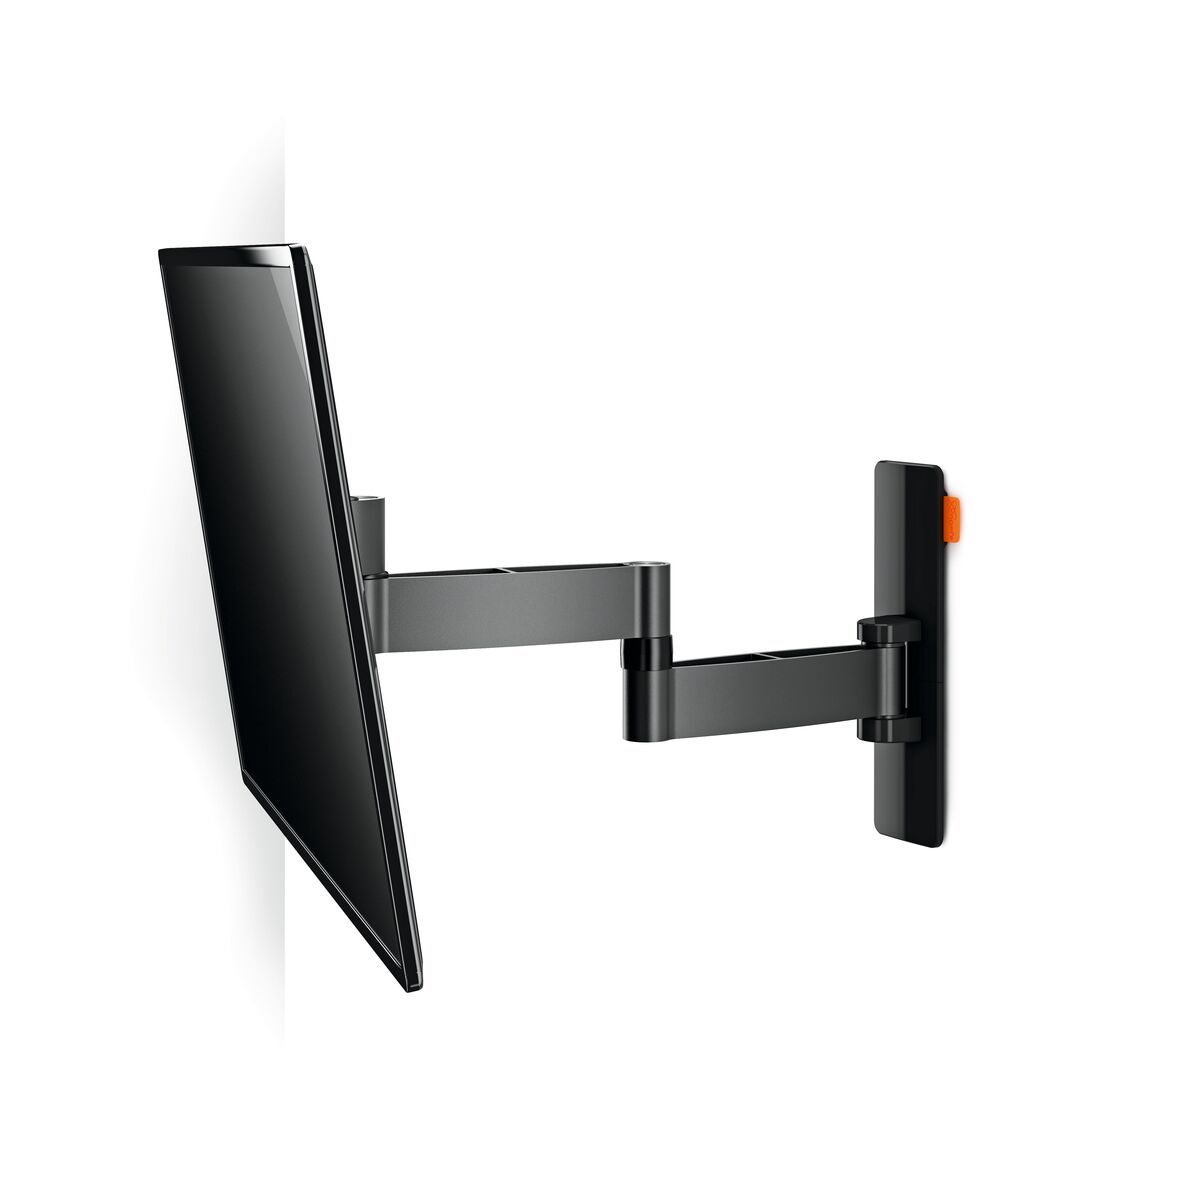 Vogel's WALL 2145 Full-Motion TV Wall Mount (black) - Suitable for 19 up to 40 inch TVs - Full motion (up to 180°) - Tilt -10°/+10° - White wall